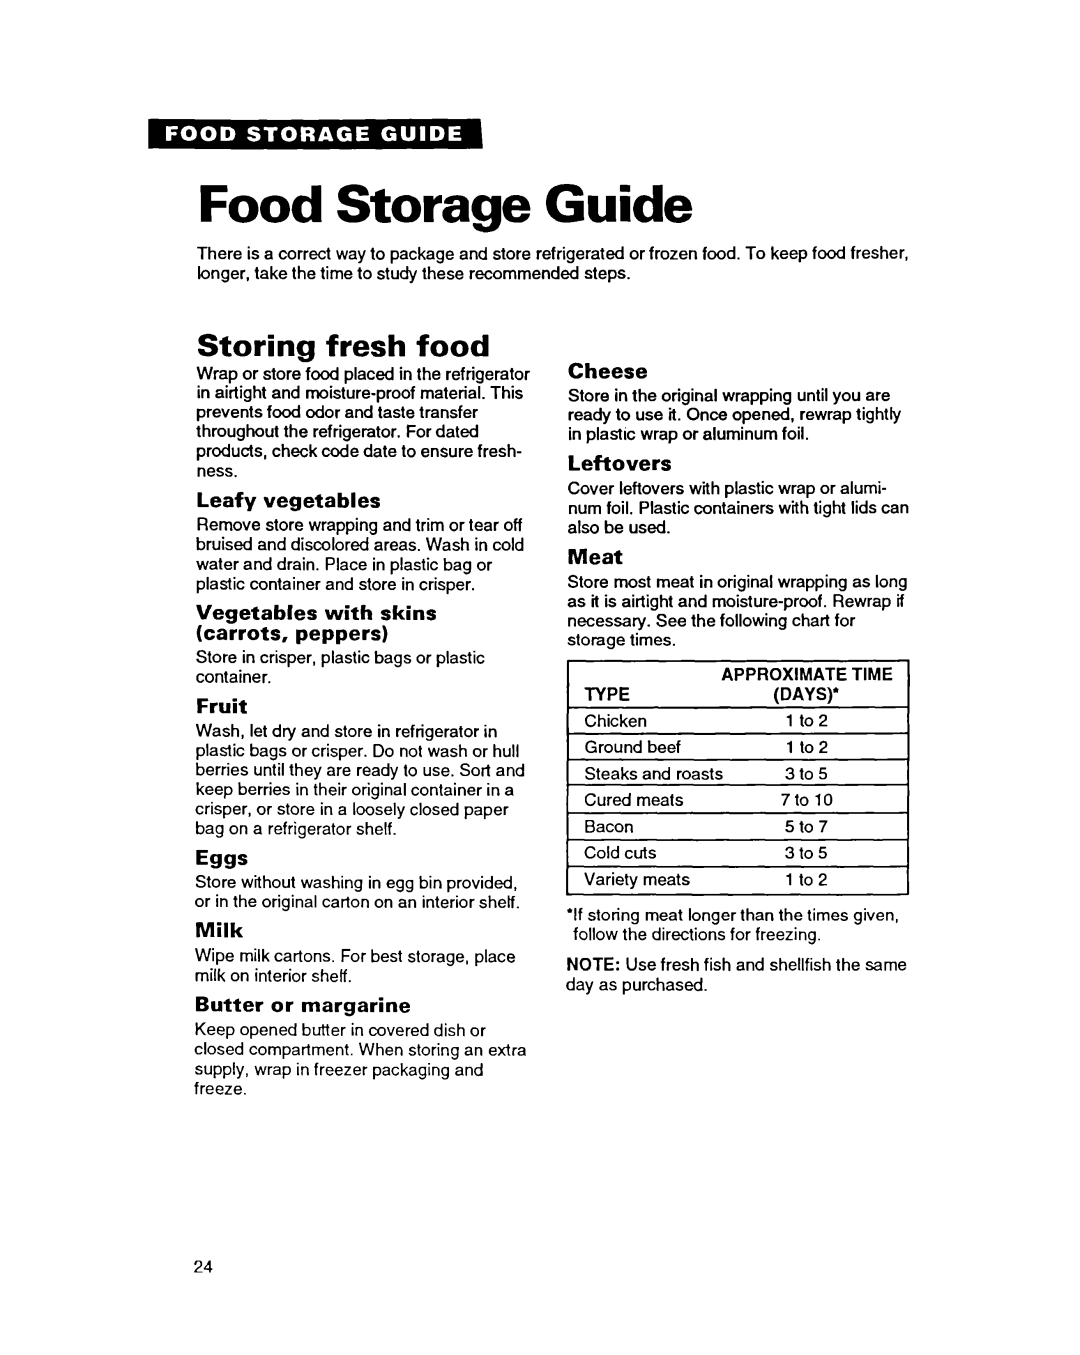 Whirlpool ED22PC Food Storage Guide, Storing fresh food, Leafy vegetables, Vegetables with skins carrots, peppers, Fruit 